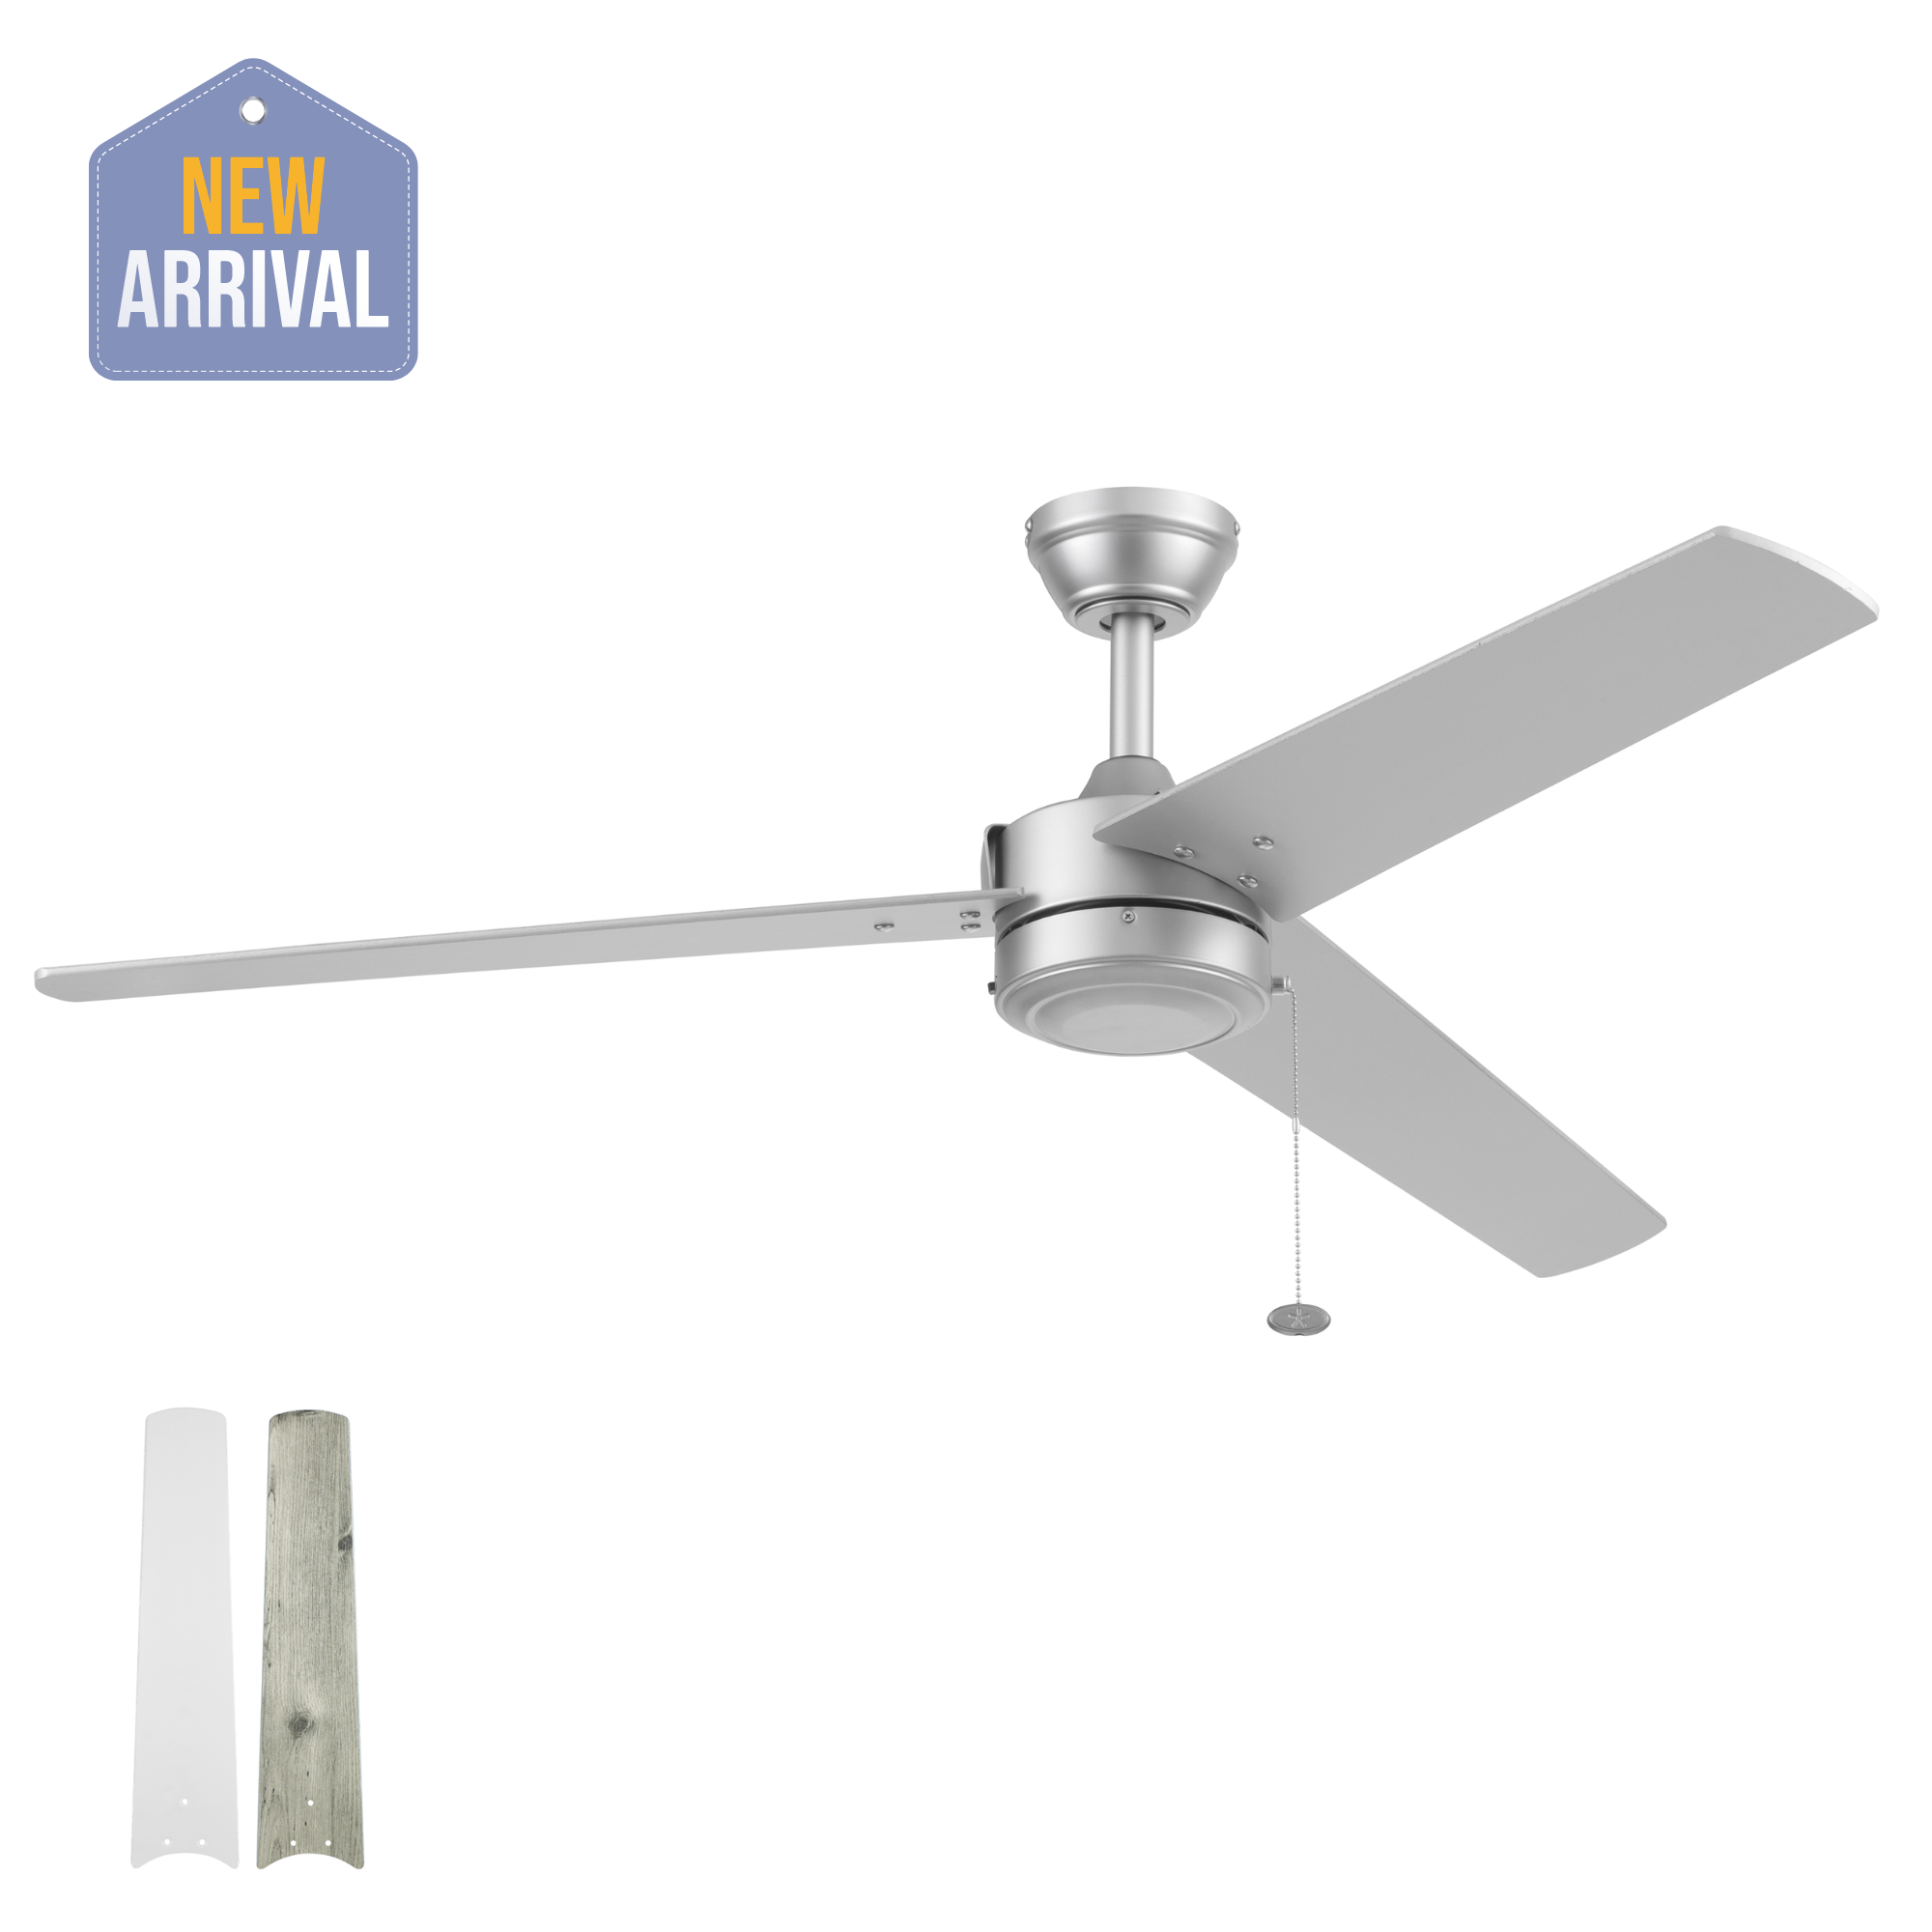 52 Inch Tenant, Matte Nickel, Pull Chain, Indoor/Outdoor Ceiling Fan by Prominence Home